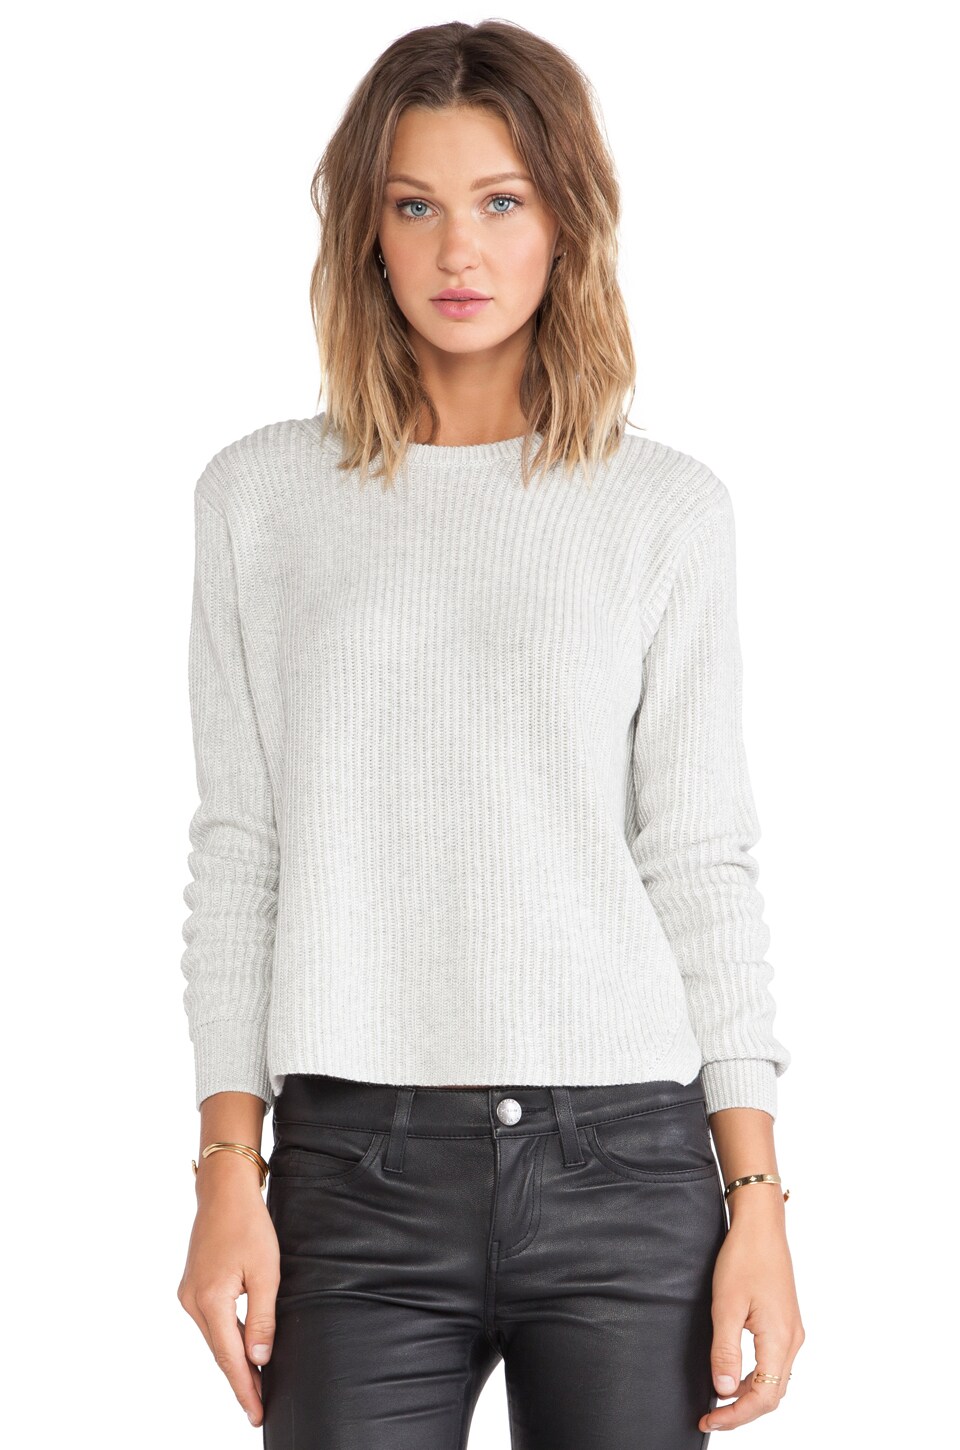 Theory Remrita Cashmere Sweater in Frost Blue/Ivory | REVOLVE